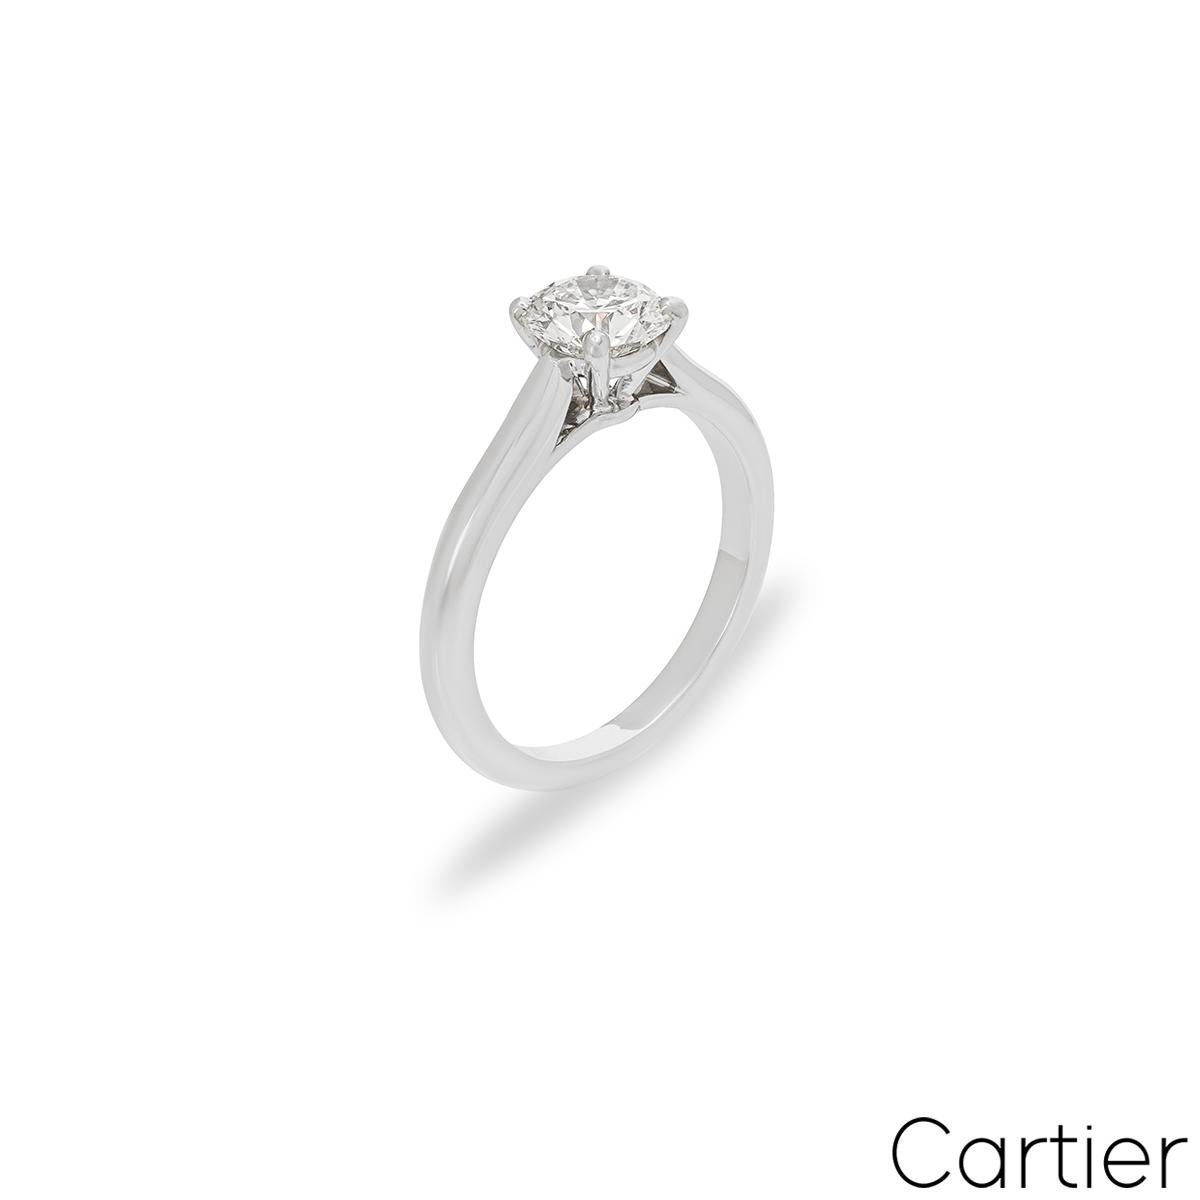 A captivating platinum diamond engagement ring by Cartier from the Solitaire 1895 collection. The ring comprises of a round brilliant cut diamond in a four prong setting weighing 1.21ct, F colour and VVS1 clarity. The diamond scores an excellent